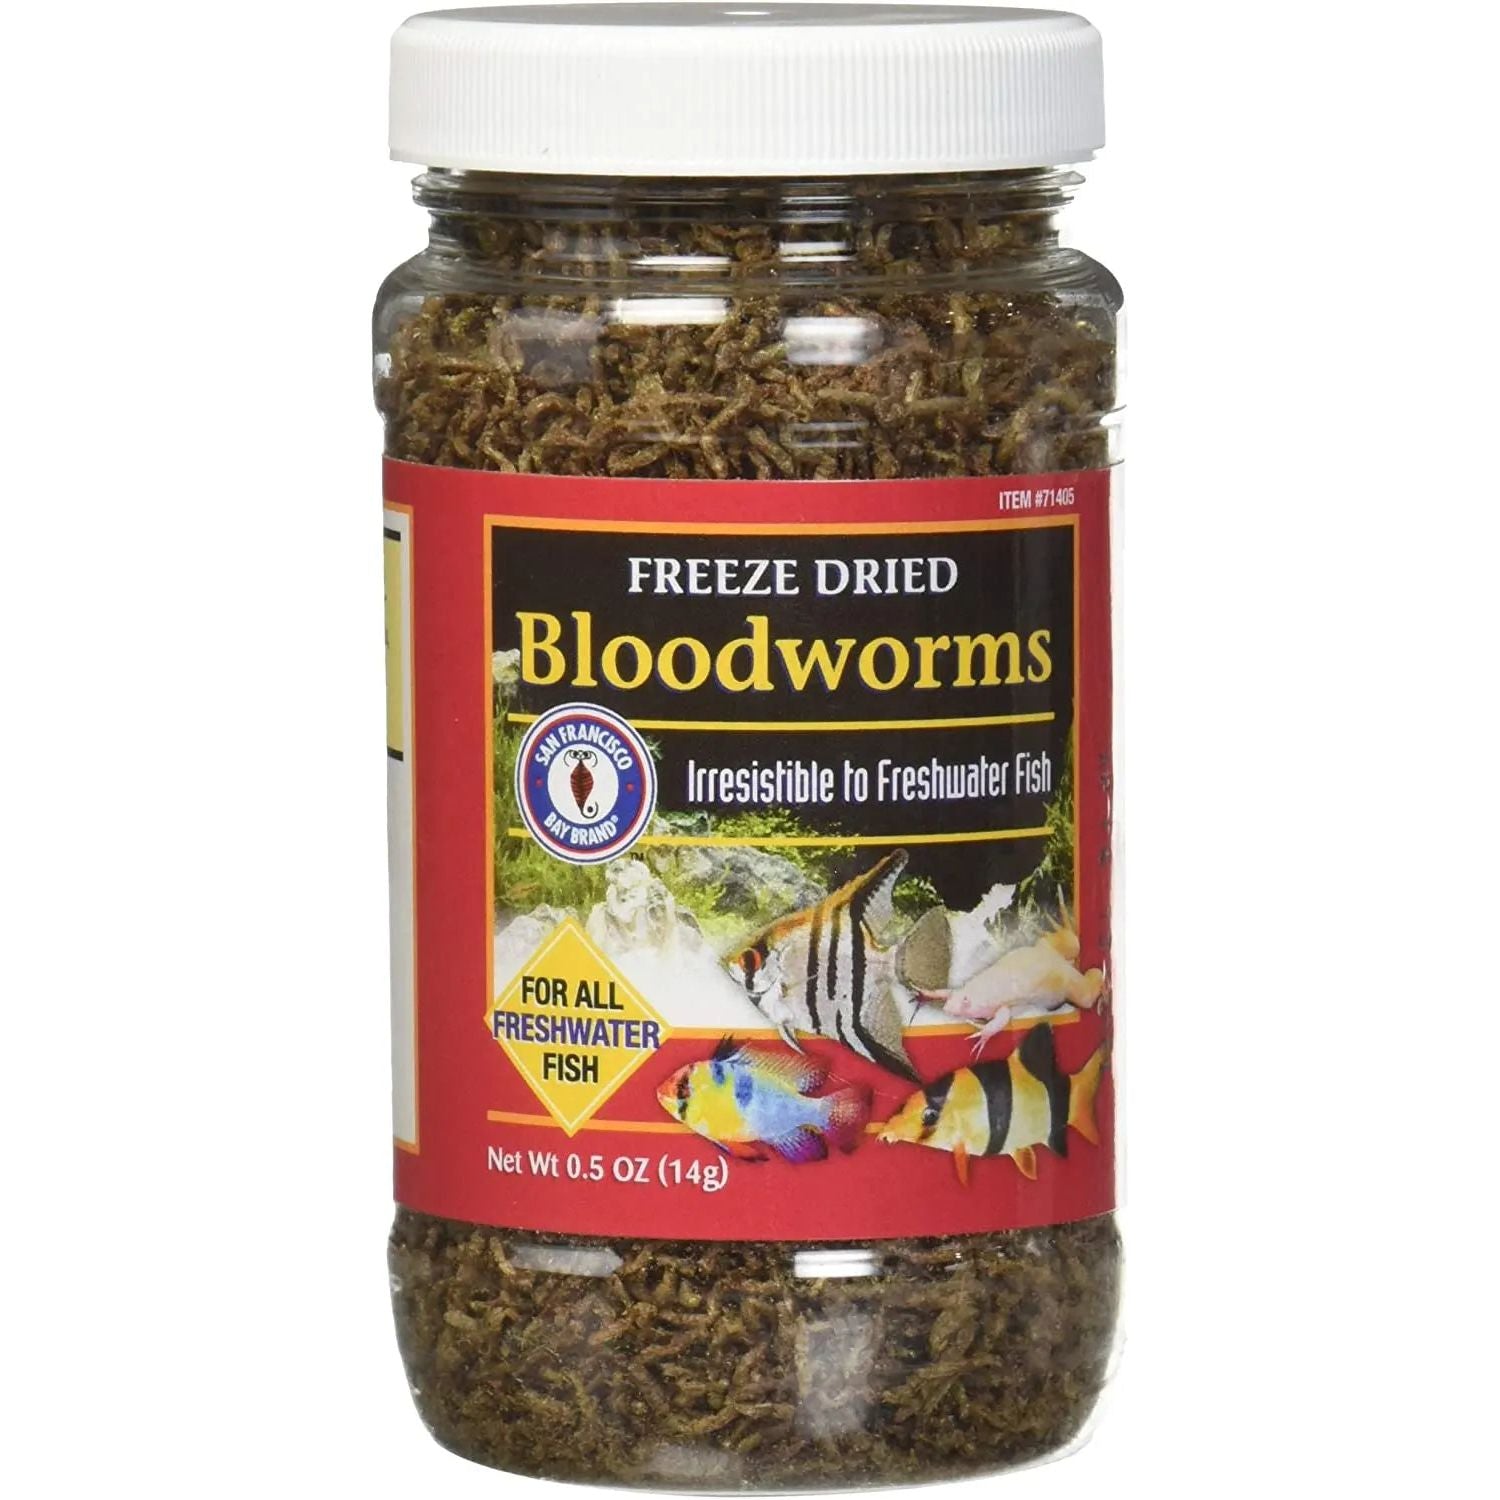 http://piccardpets.com/cdn/shop/products/All-Natural-Freeze-Dried-Bloodworms-Freshwater-Fish-Food-14g-San-Francisco-Bay-Brand-1677142446_29b02a57-25a0-4238-a5f1-6522a9b53b9c.jpg?v=1708364298